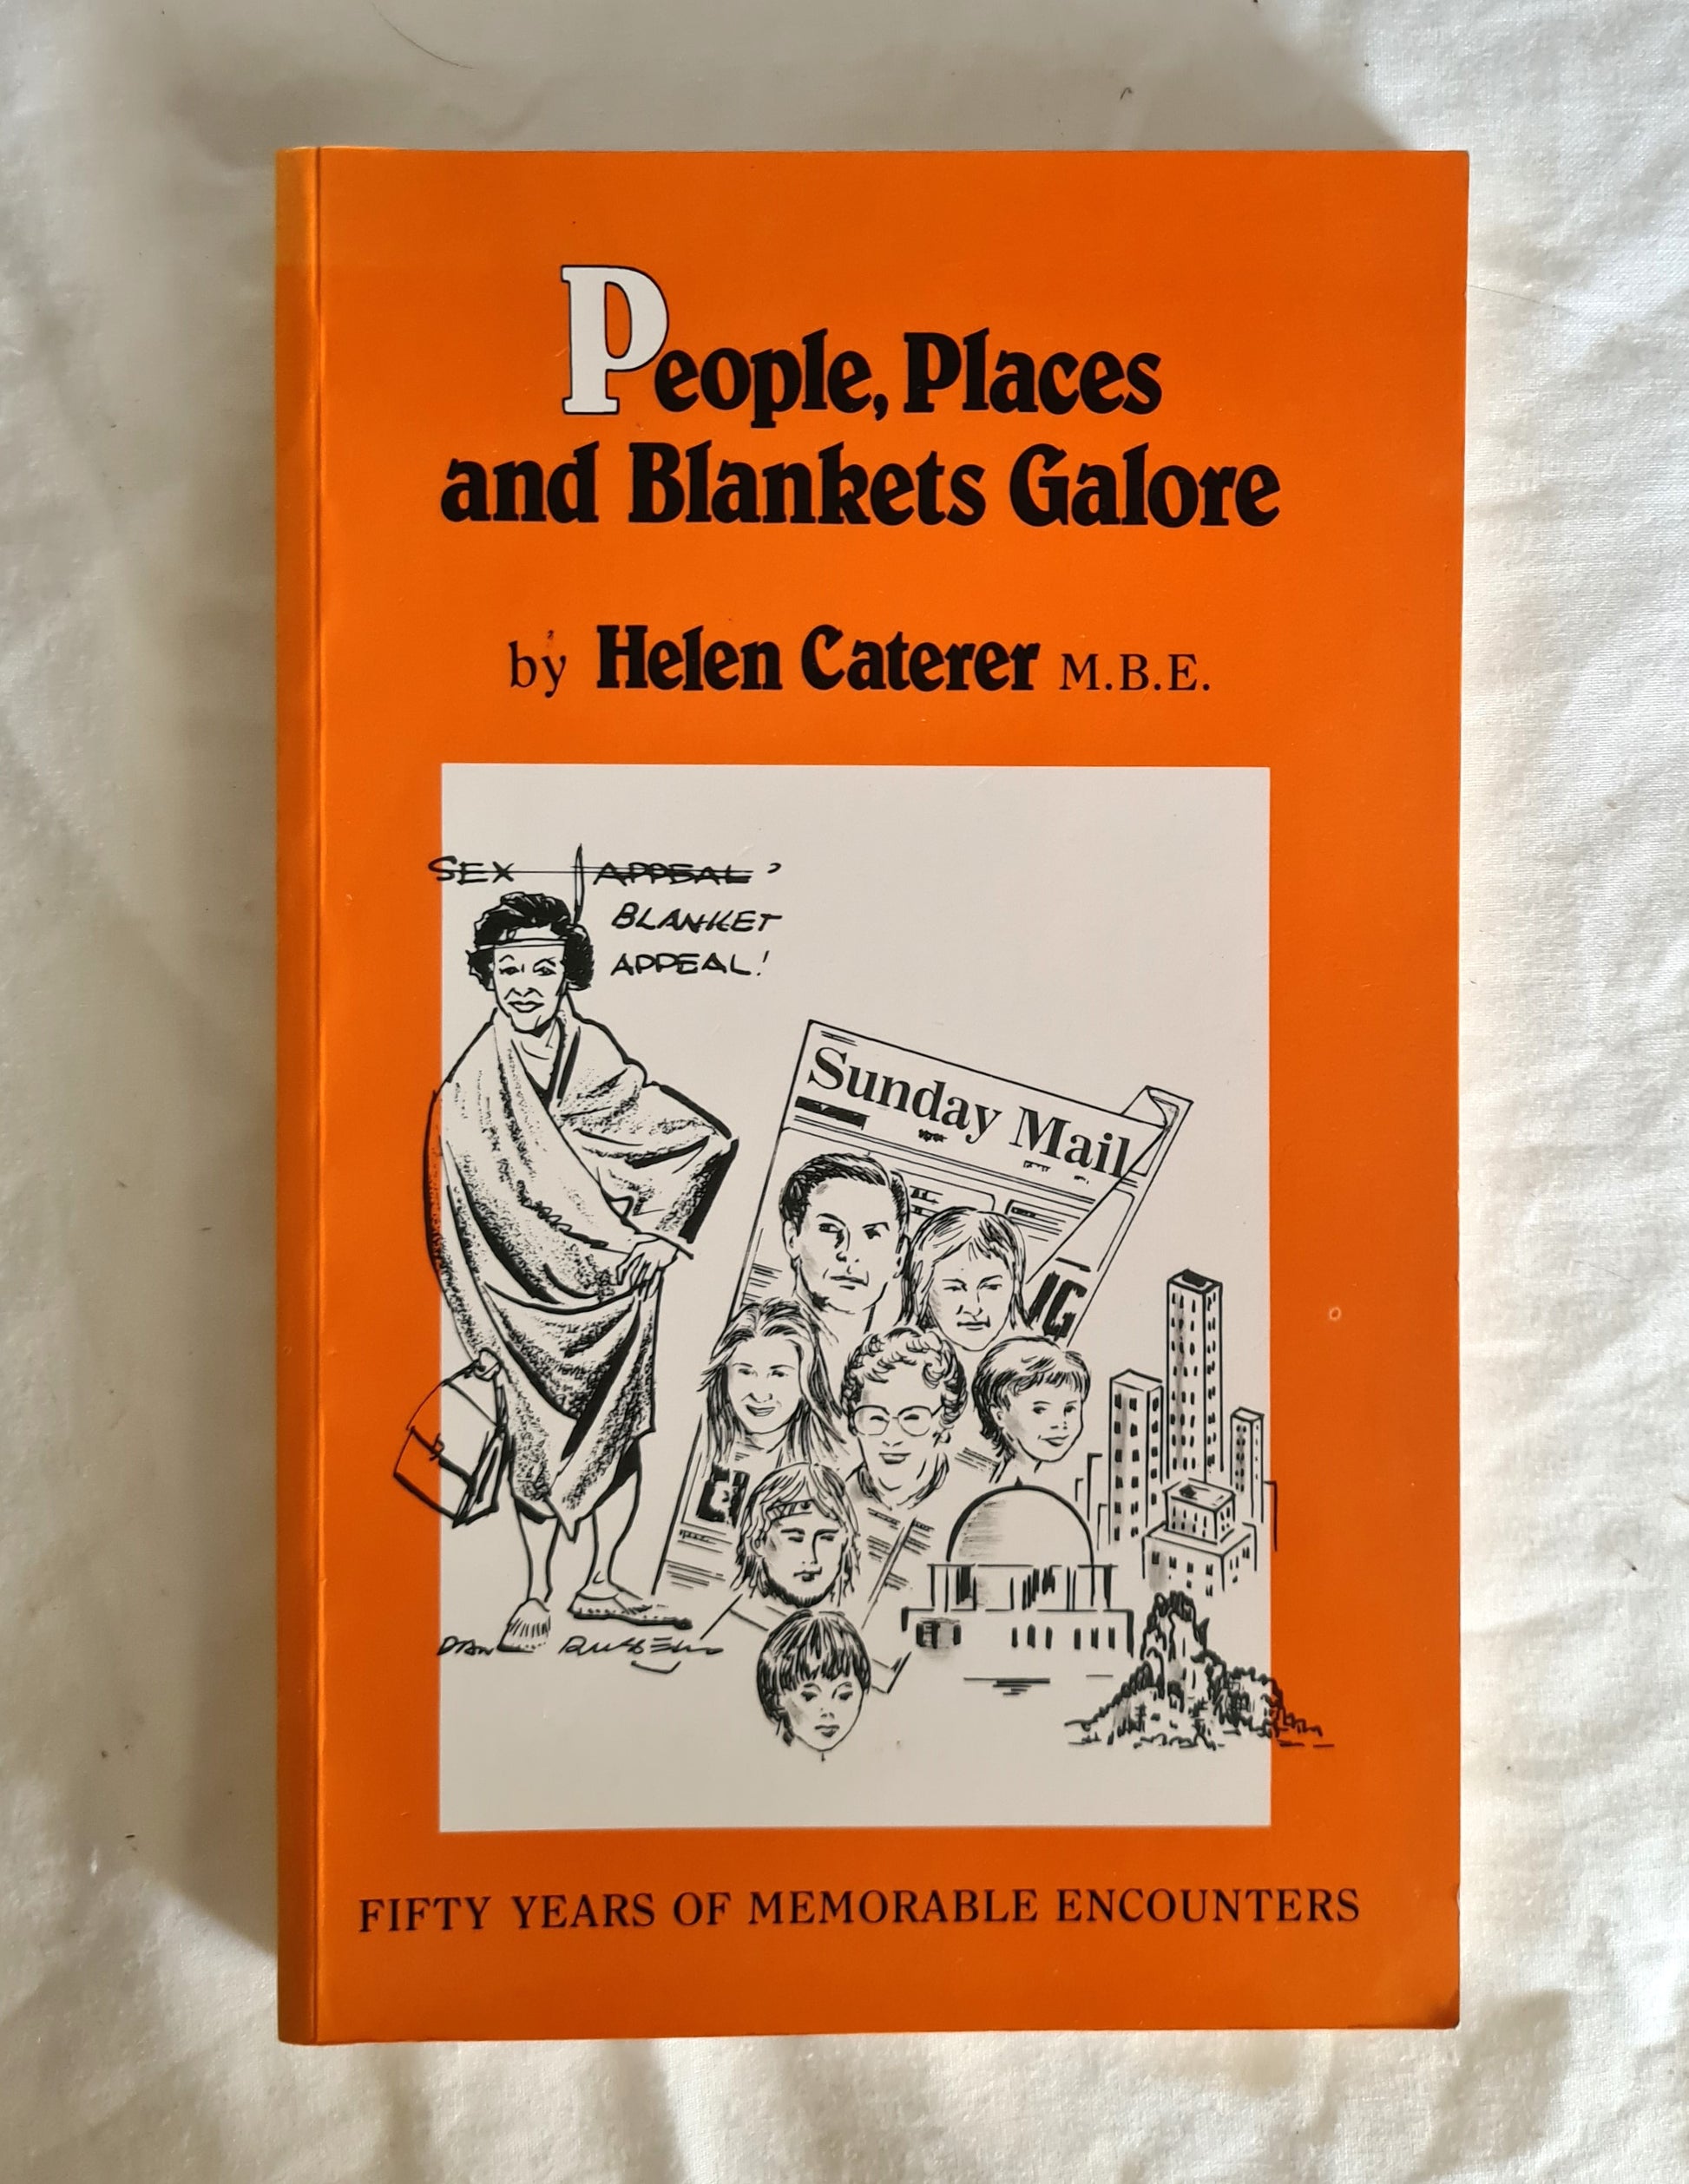 People, Places and Blankets Galore  Fifty Years of Memorable Encounters  by Helen Caterer